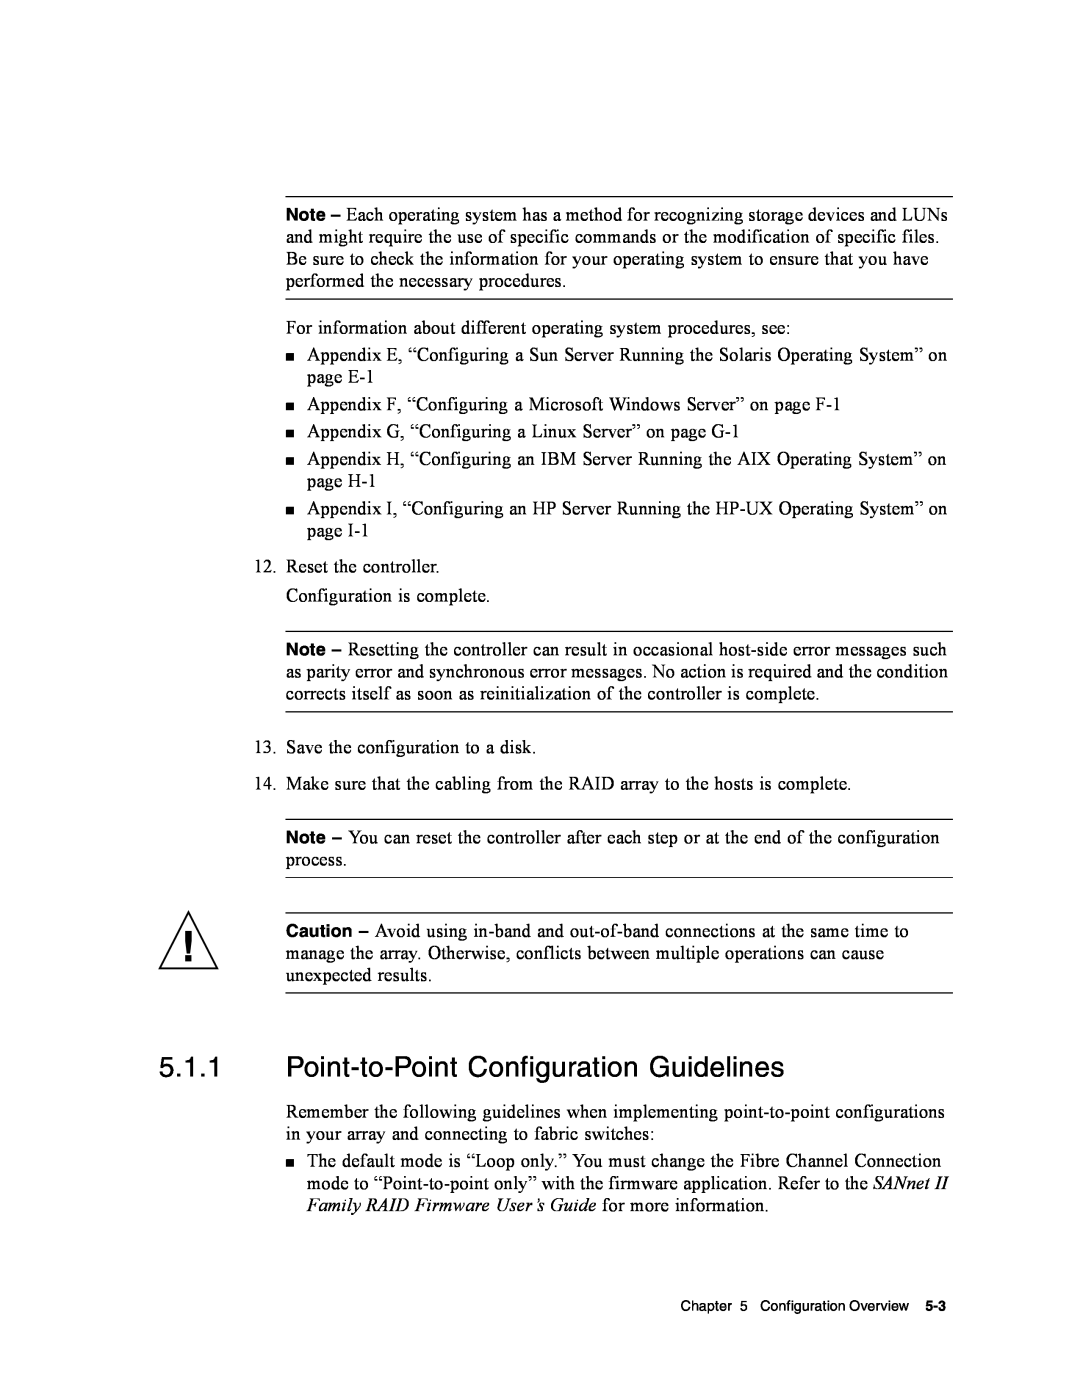 Dot Hill Systems II 200 FC service manual Point-to-Point Configuration Guidelines 